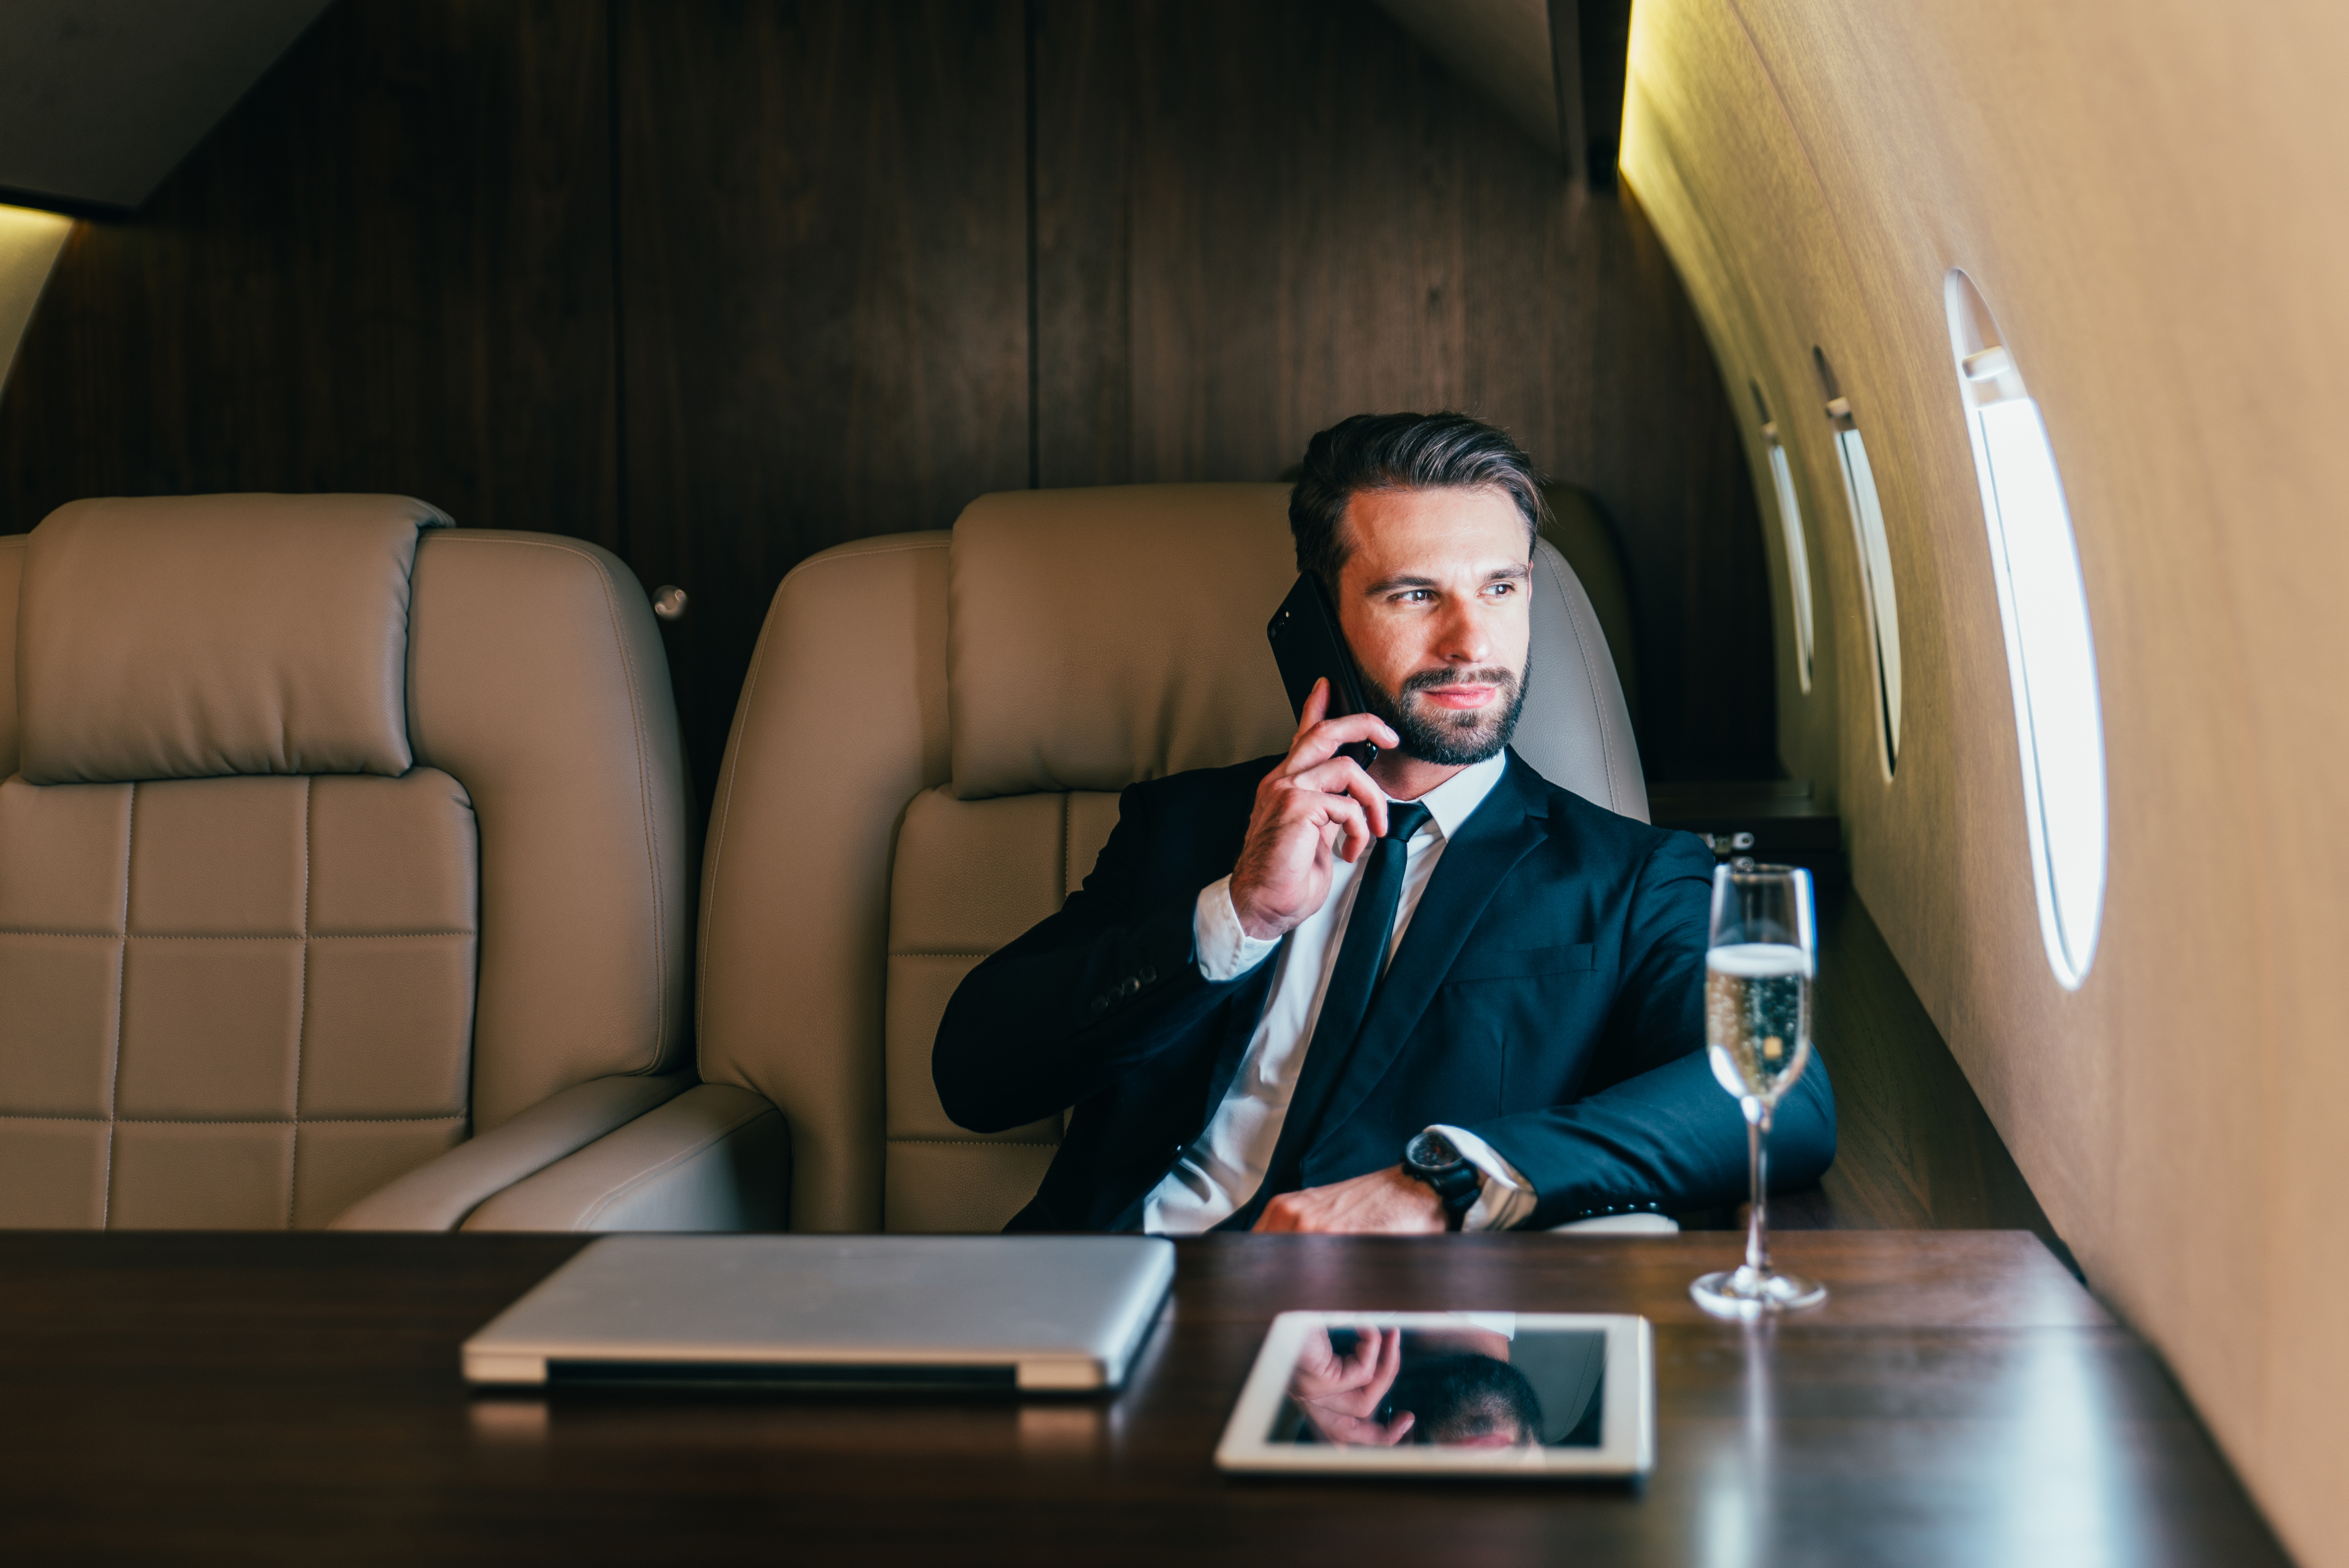 Businessman flying on his private jet | Source: Shutterstock